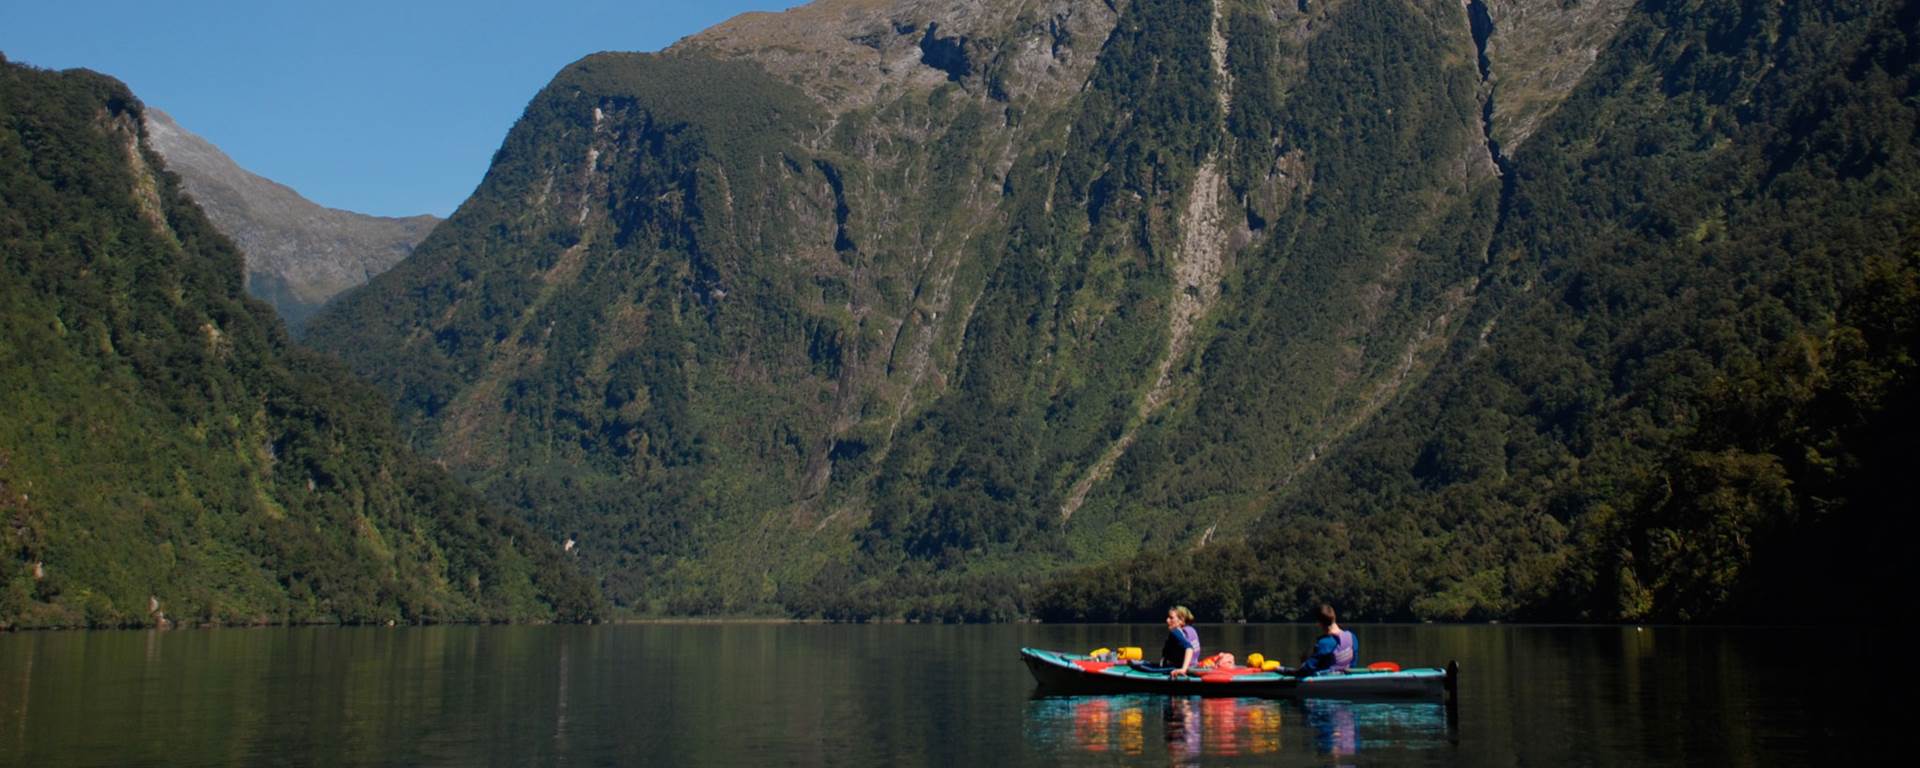 Kayakers in Doubtful Sound